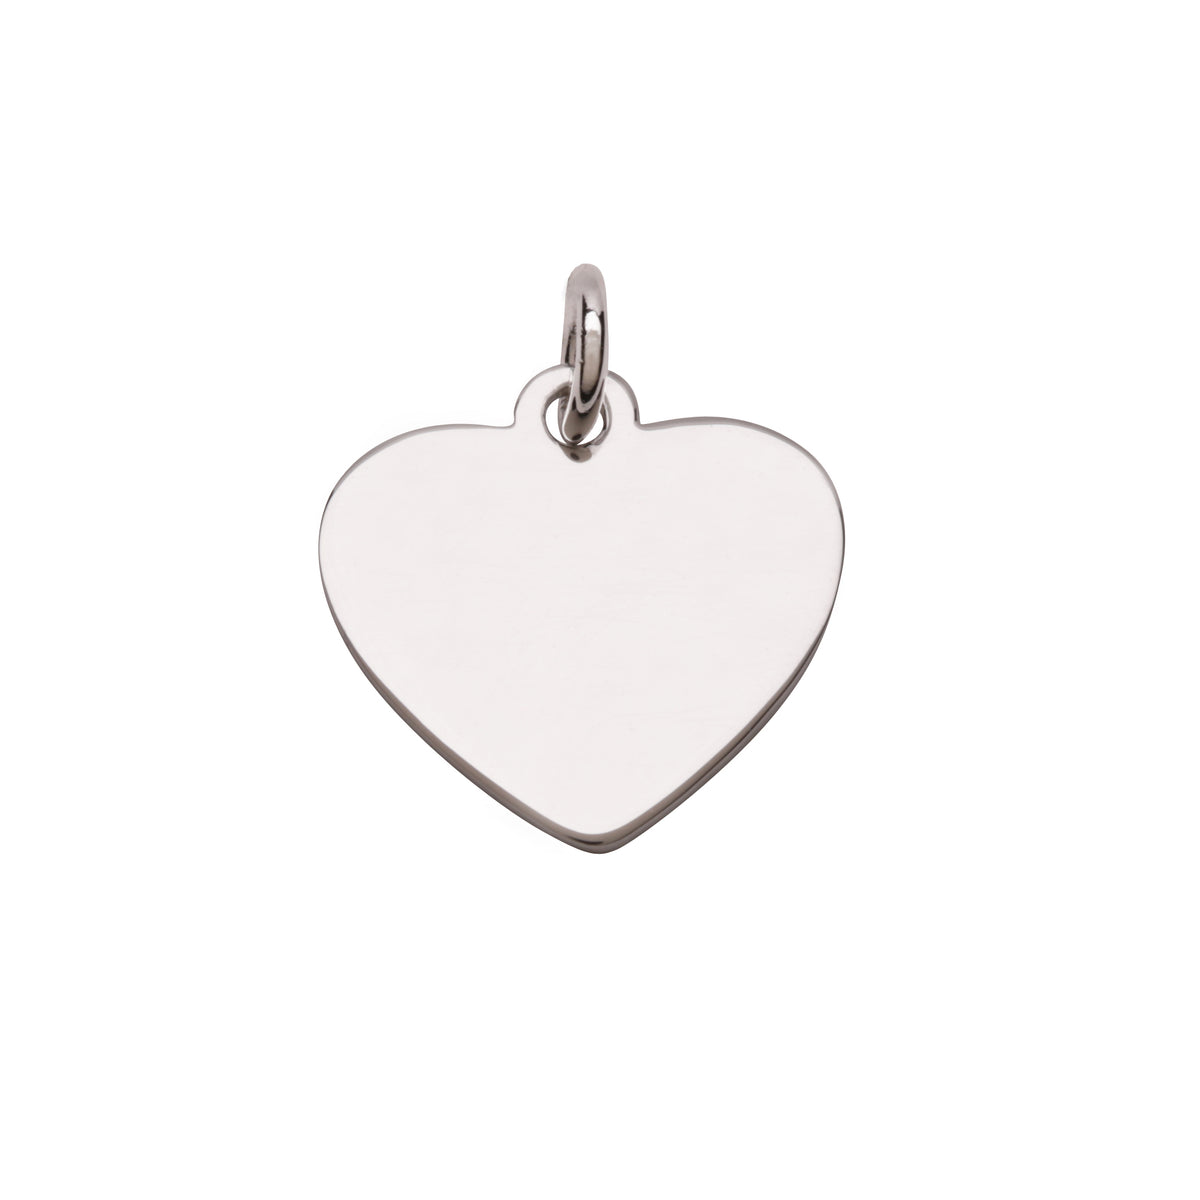 Engravable Heart Bracelet Charms in sterling silver-charms for bracelets